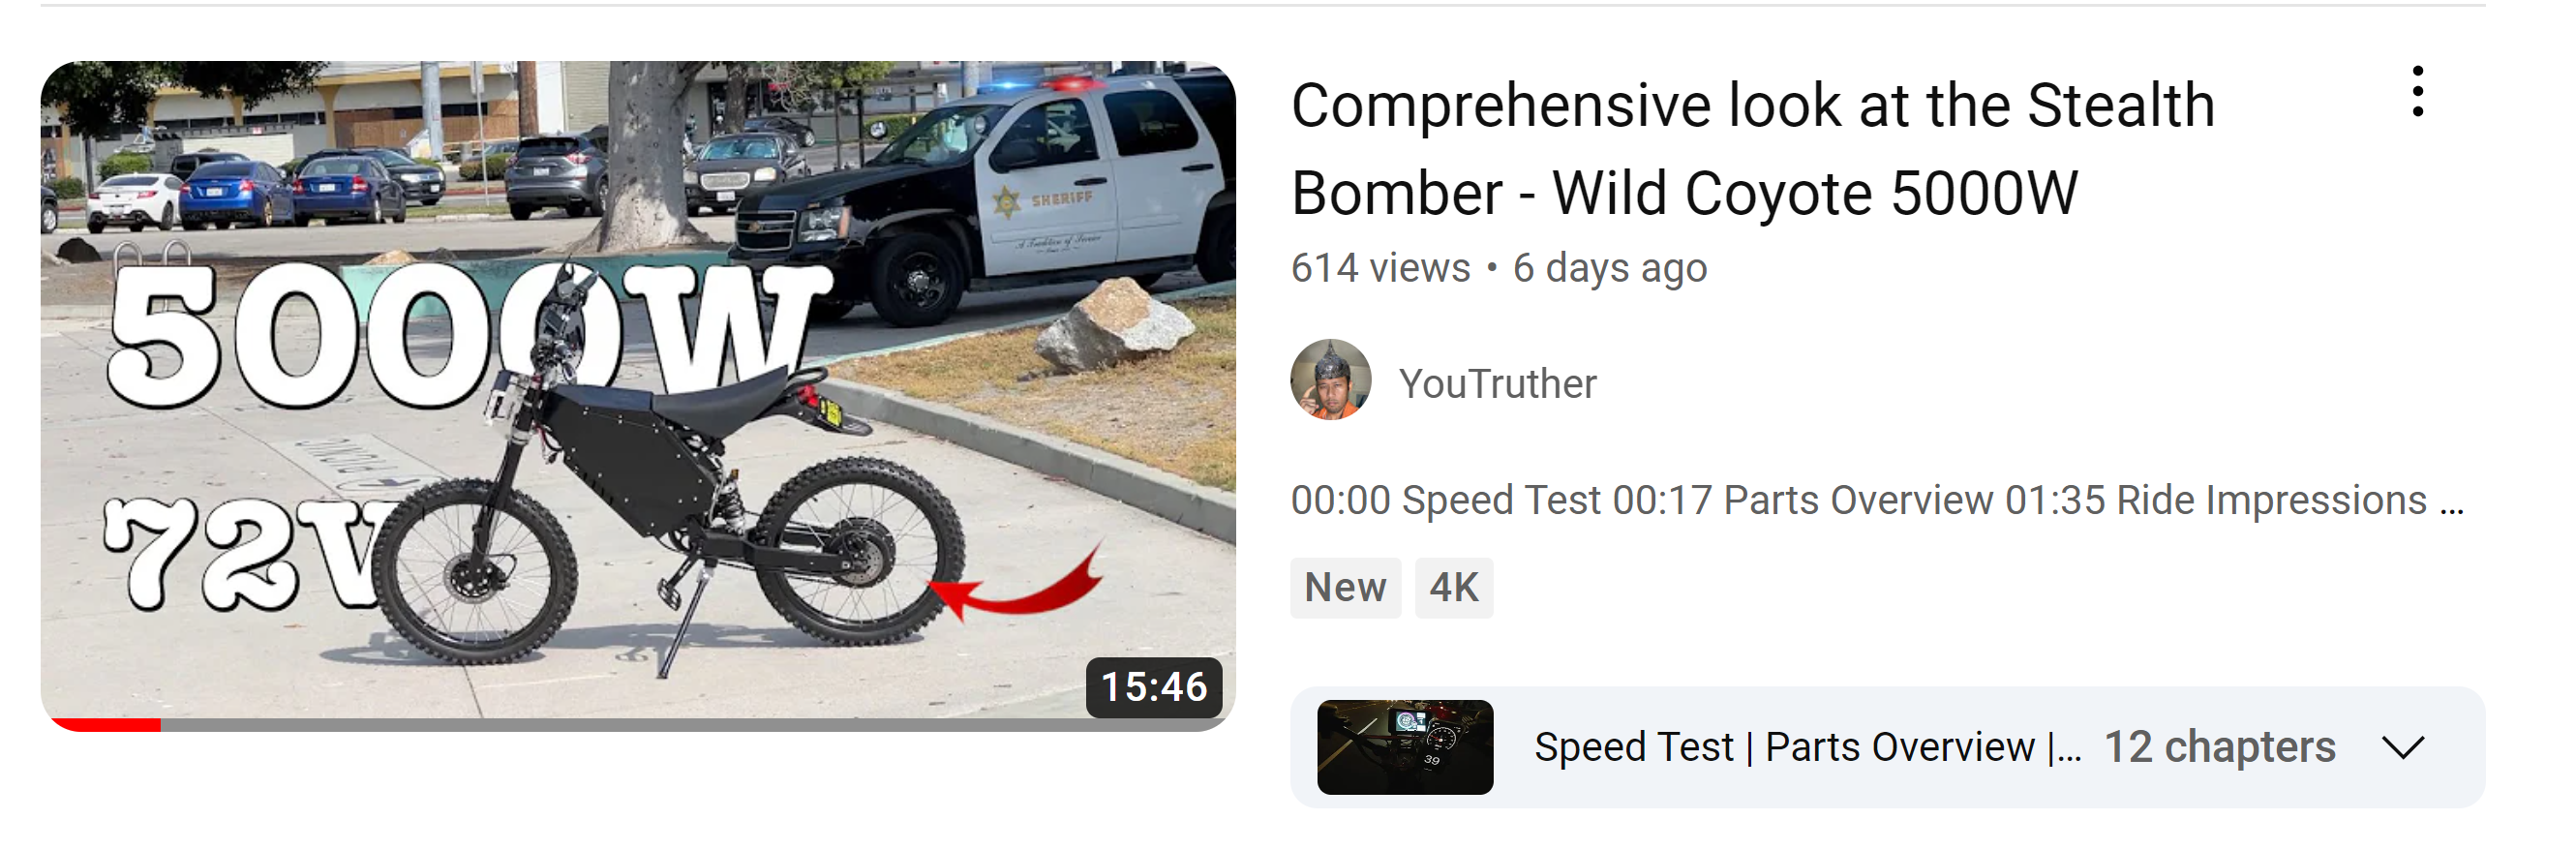 Youtube Video Blogger, Charlie "YouTruther" Reviews Sahara Bikes Wild Coyote 5000w Stealth Bomber E Bike